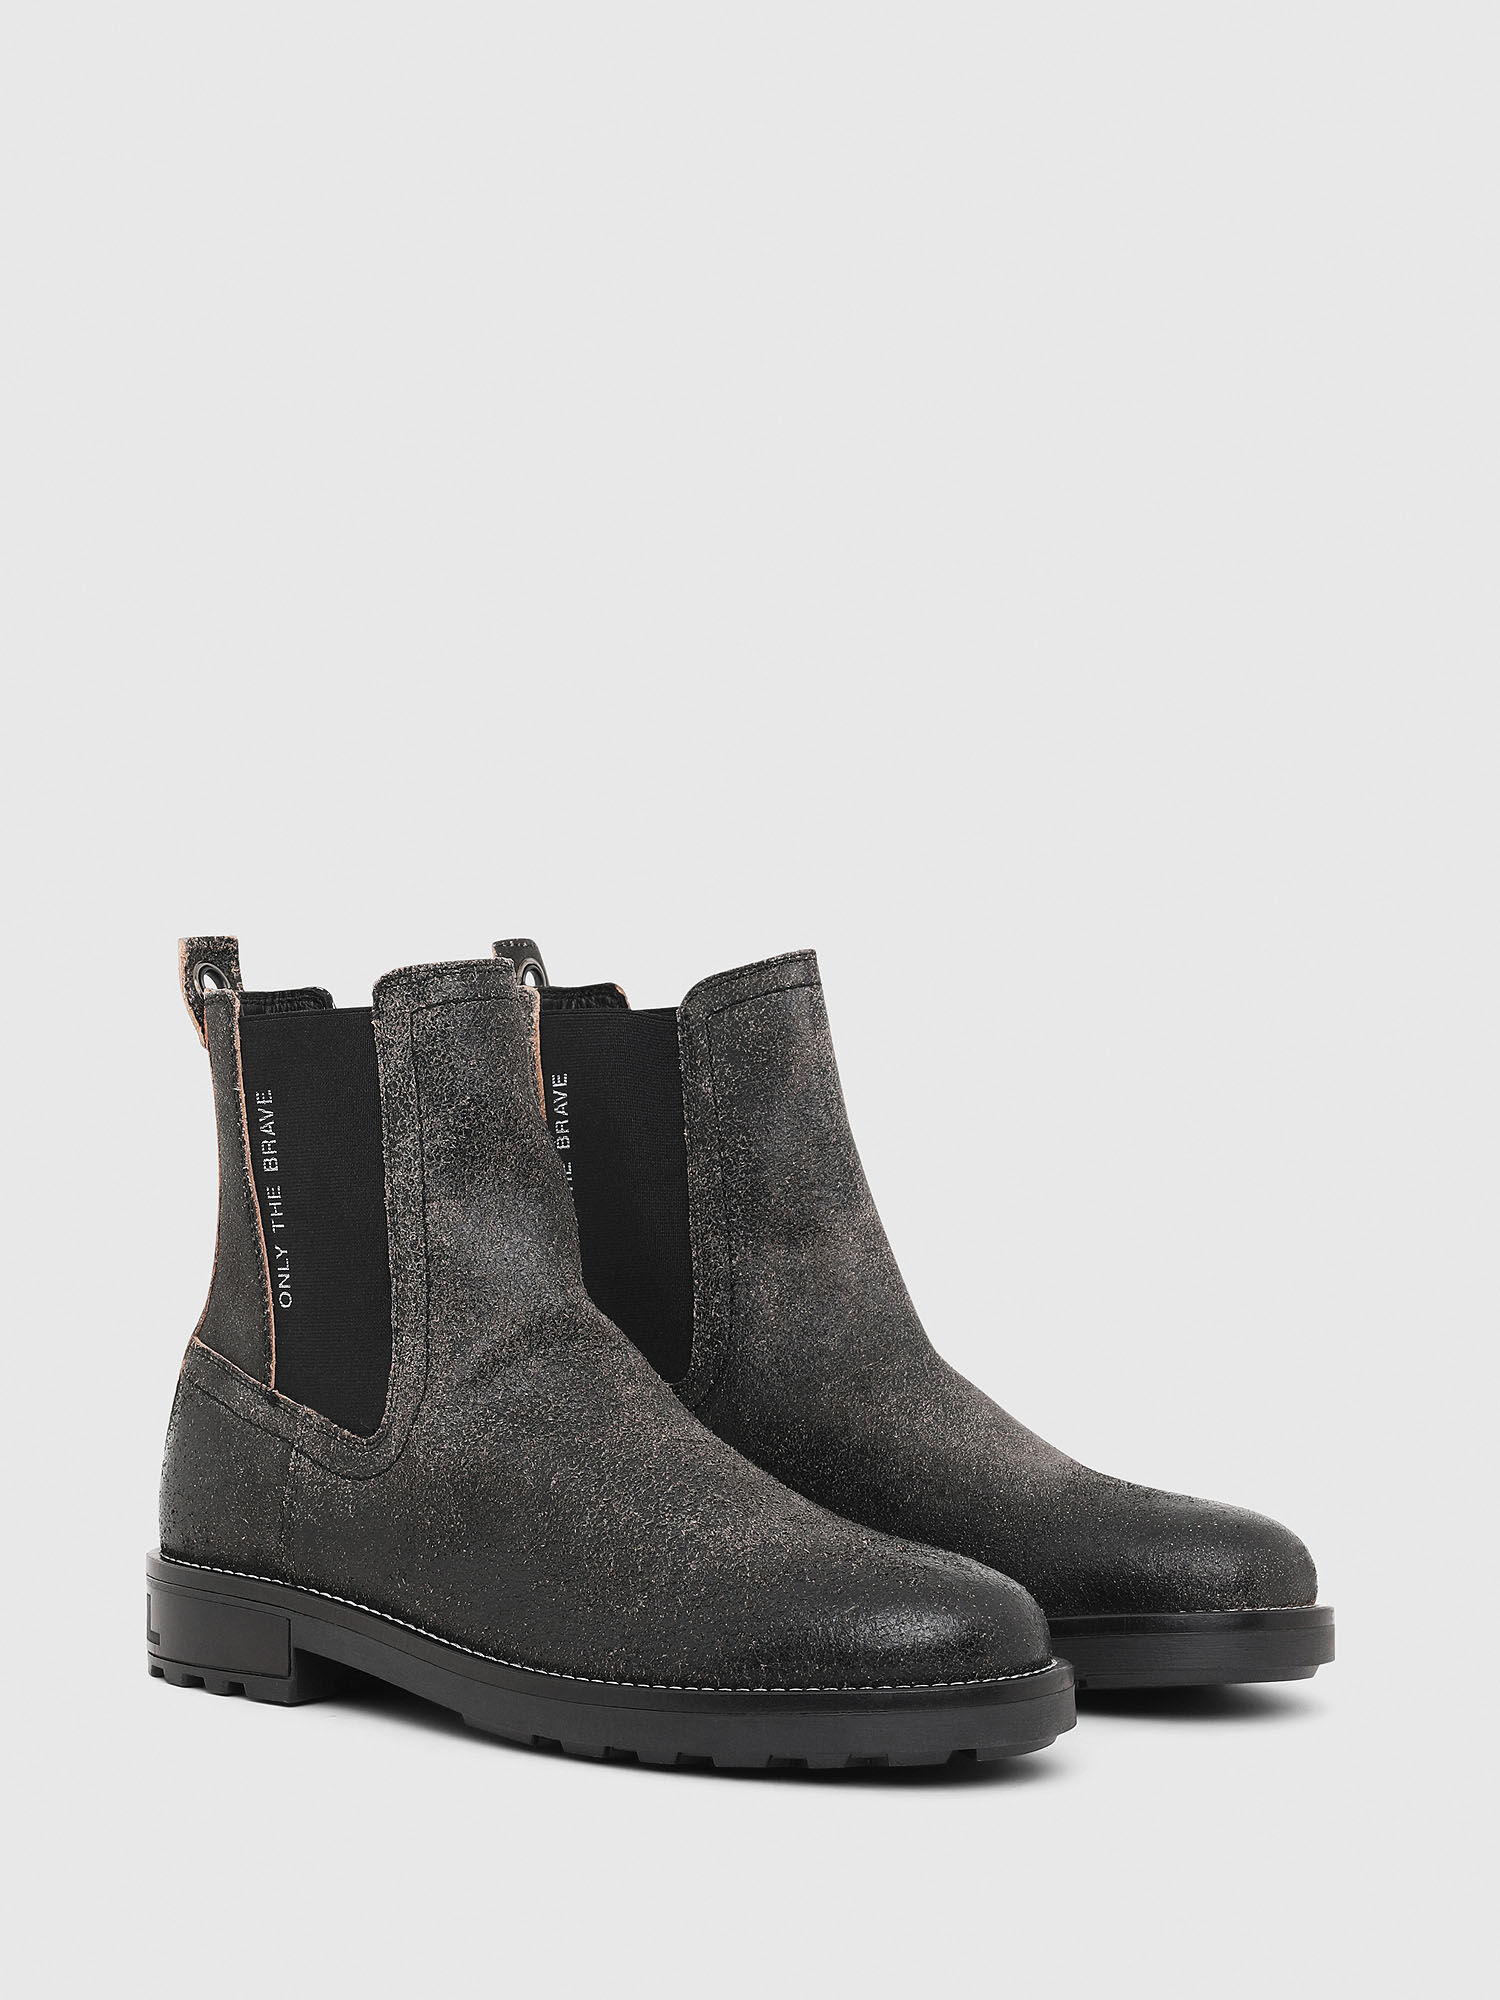 Men: Chelsea boots in aged leather | Diesel